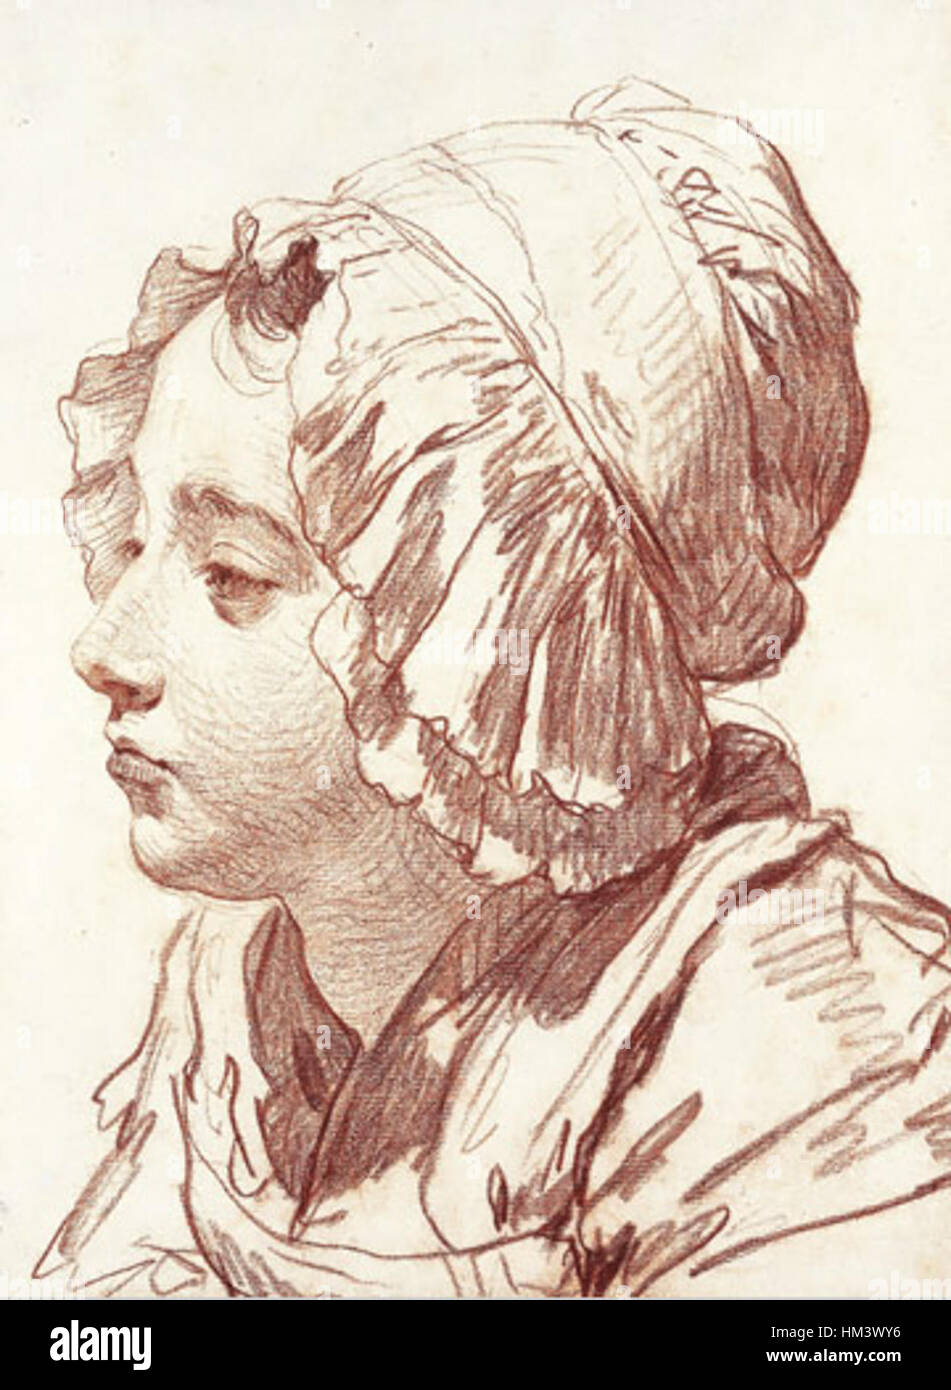 Jean-Baptiste Greuze - drawing of a woman Stock Photo